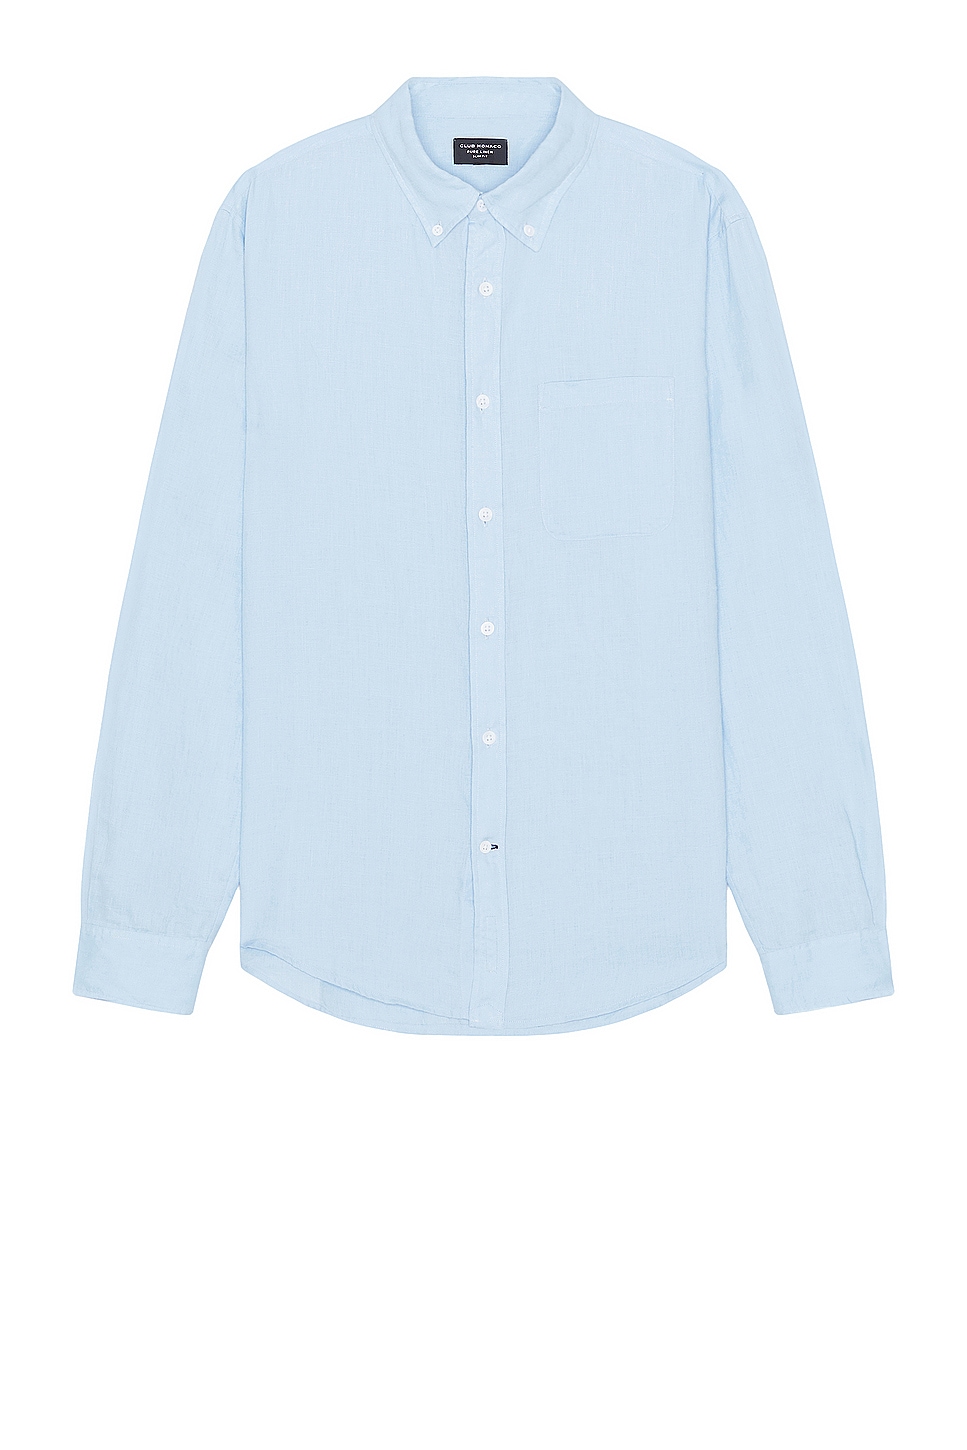 Long Sleeve Solid Linen Shirt in Blue